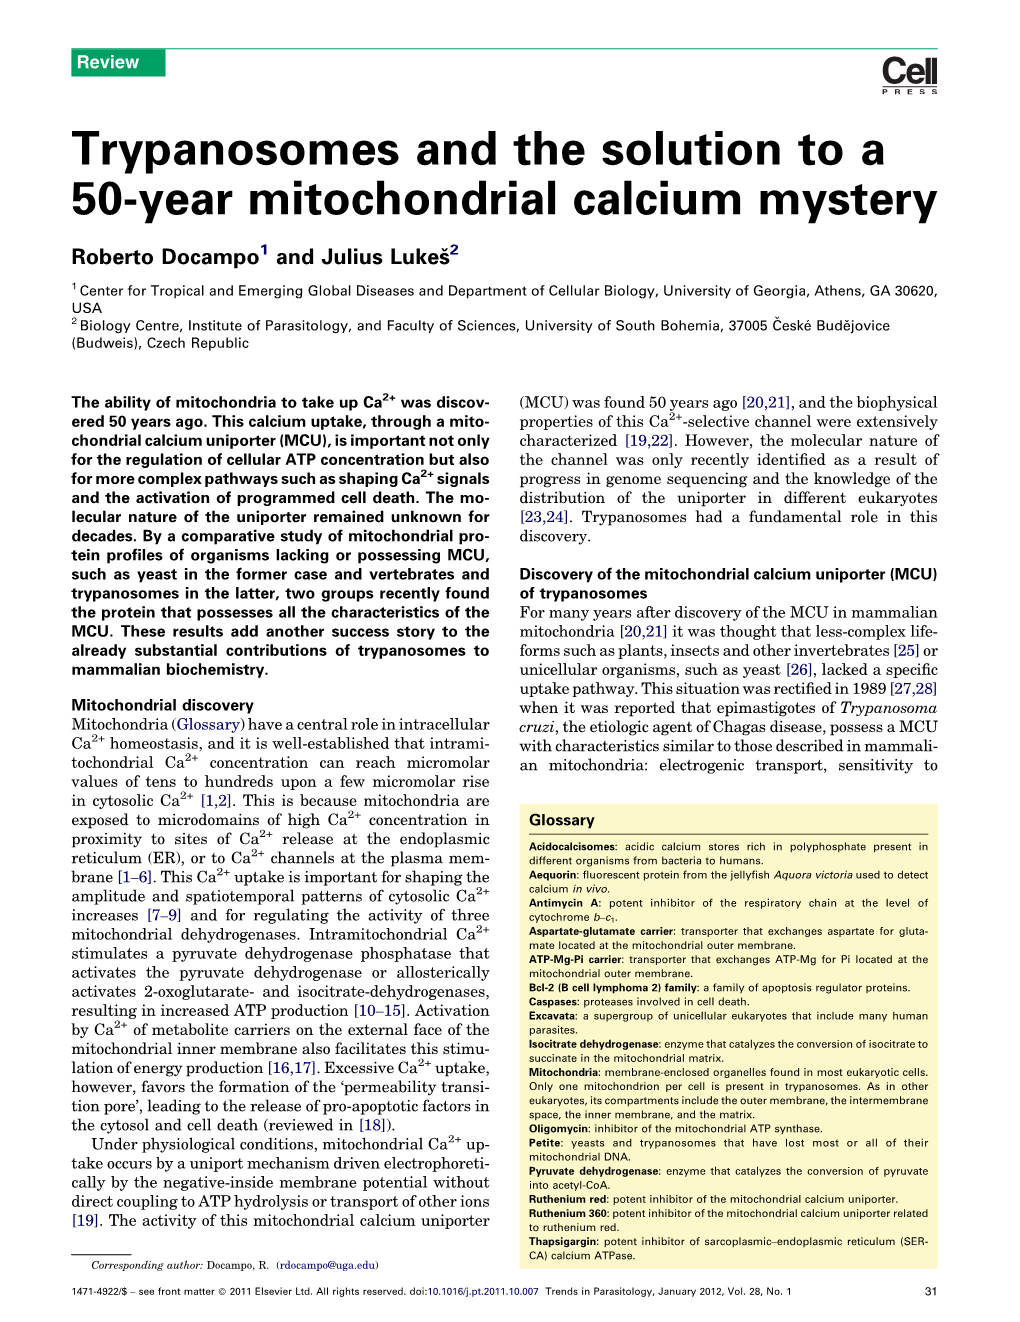 (2012) Trypanosomes and the Solution to a 50-Year Mitochondrial